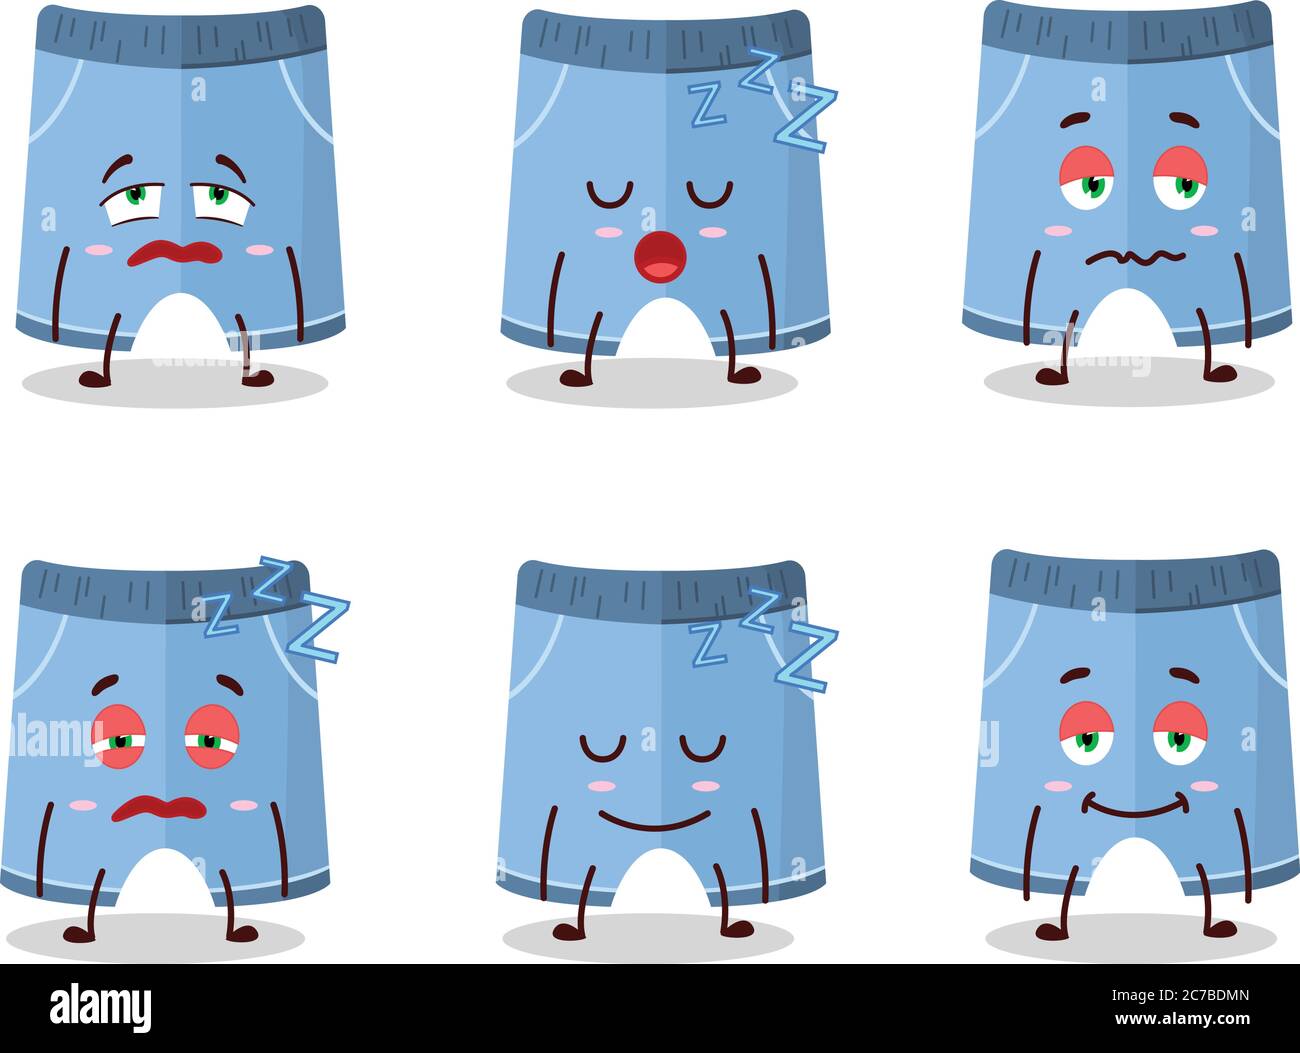 Cartoon character of shorts with sleepy expression Stock Vector